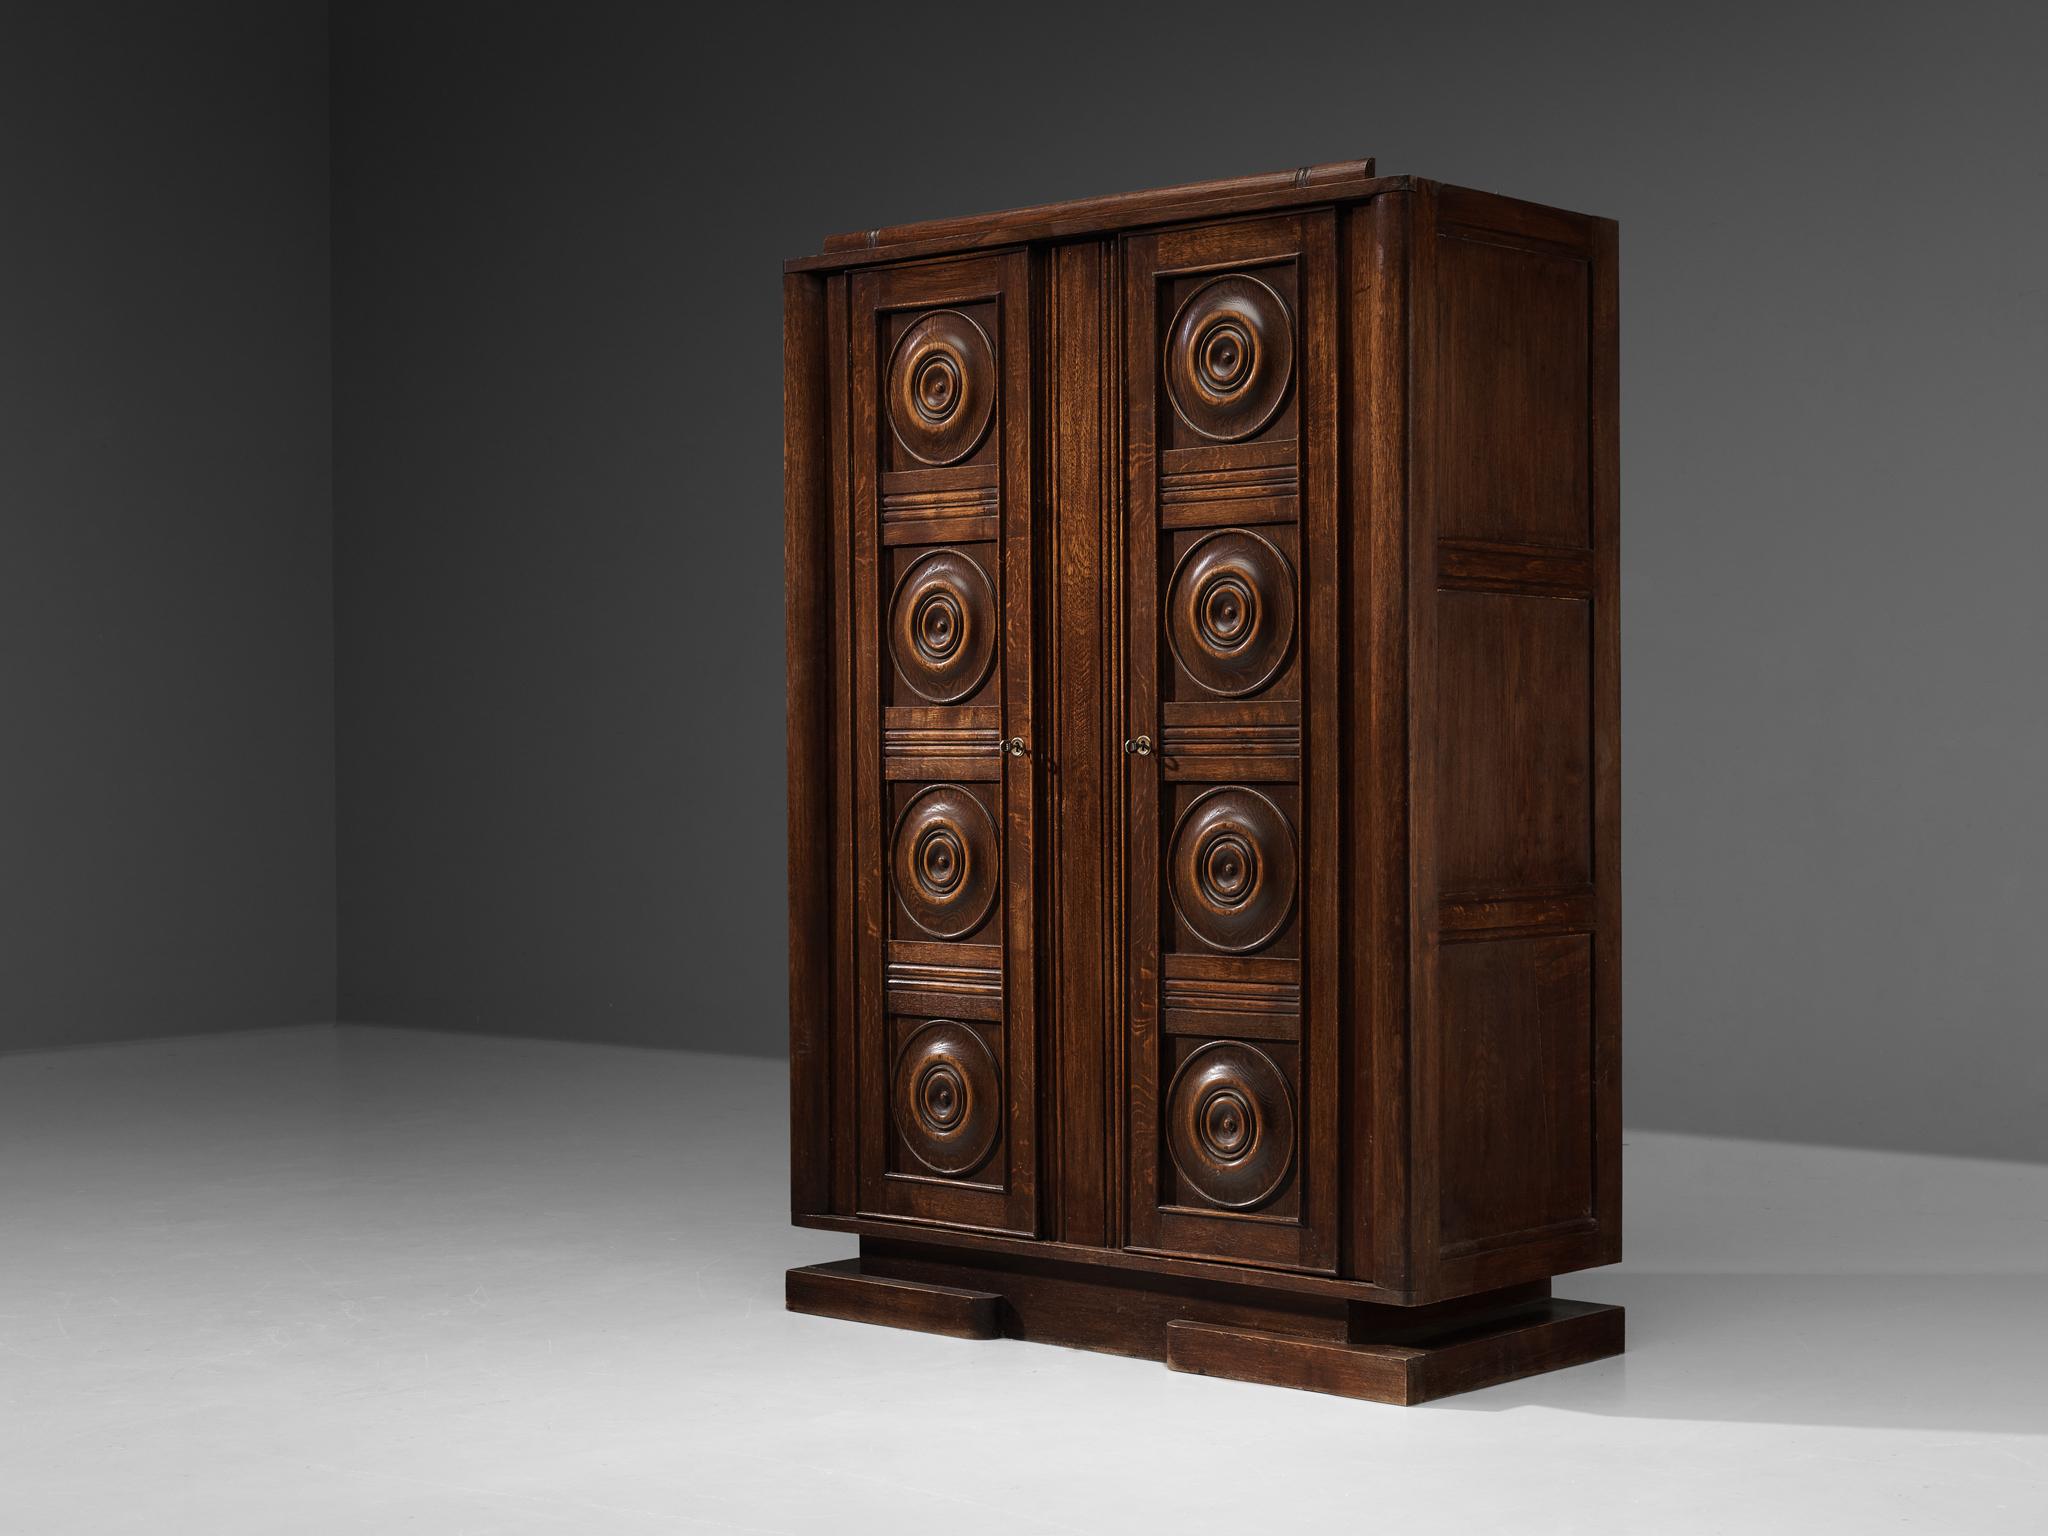 Wardrobe, oak, France, 1930s 

This sturdy wardrobe shows the typical characteristics of French Art Deco. The dynamic carved door panels show some interesting graphically patterns. Mark the beautifully shaped rounded forms adding some elegancy to